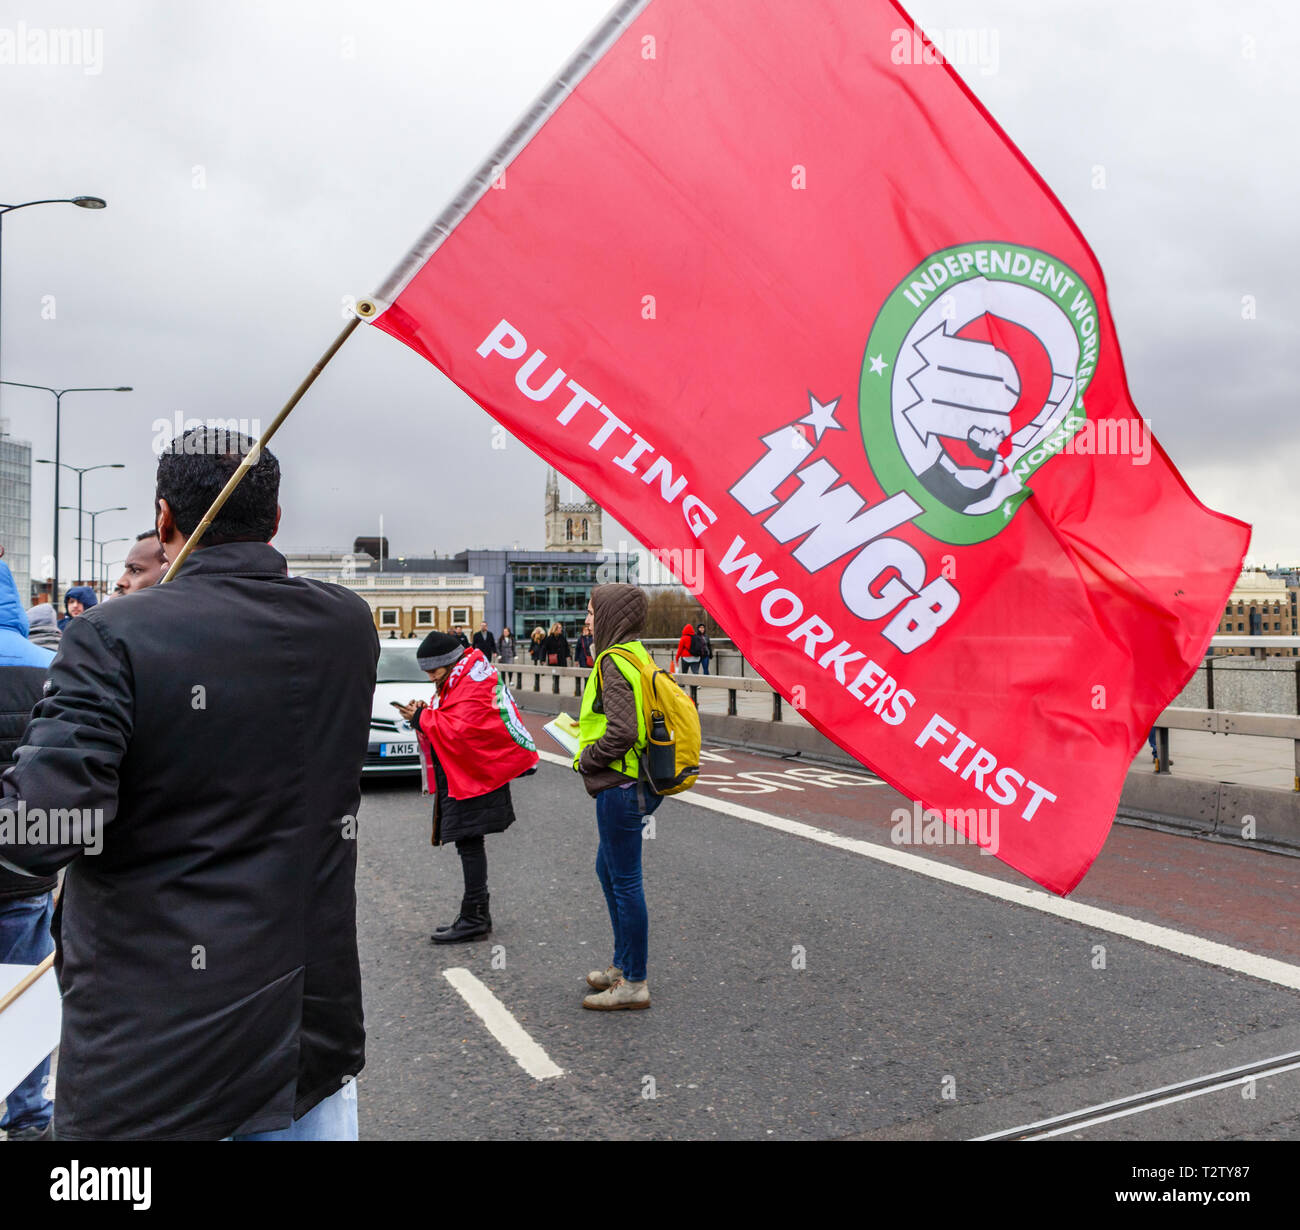 London, UK, 04th April 2019. Minicab drivers block the road on London Bridge protesting against the congestion change on private hire minicabs.  This demonstrators holds and waves the red flag of IWGB (Independent Workers Union of Great Britain). Credit: Graham Prentice/Alamy Live News Stock Photo